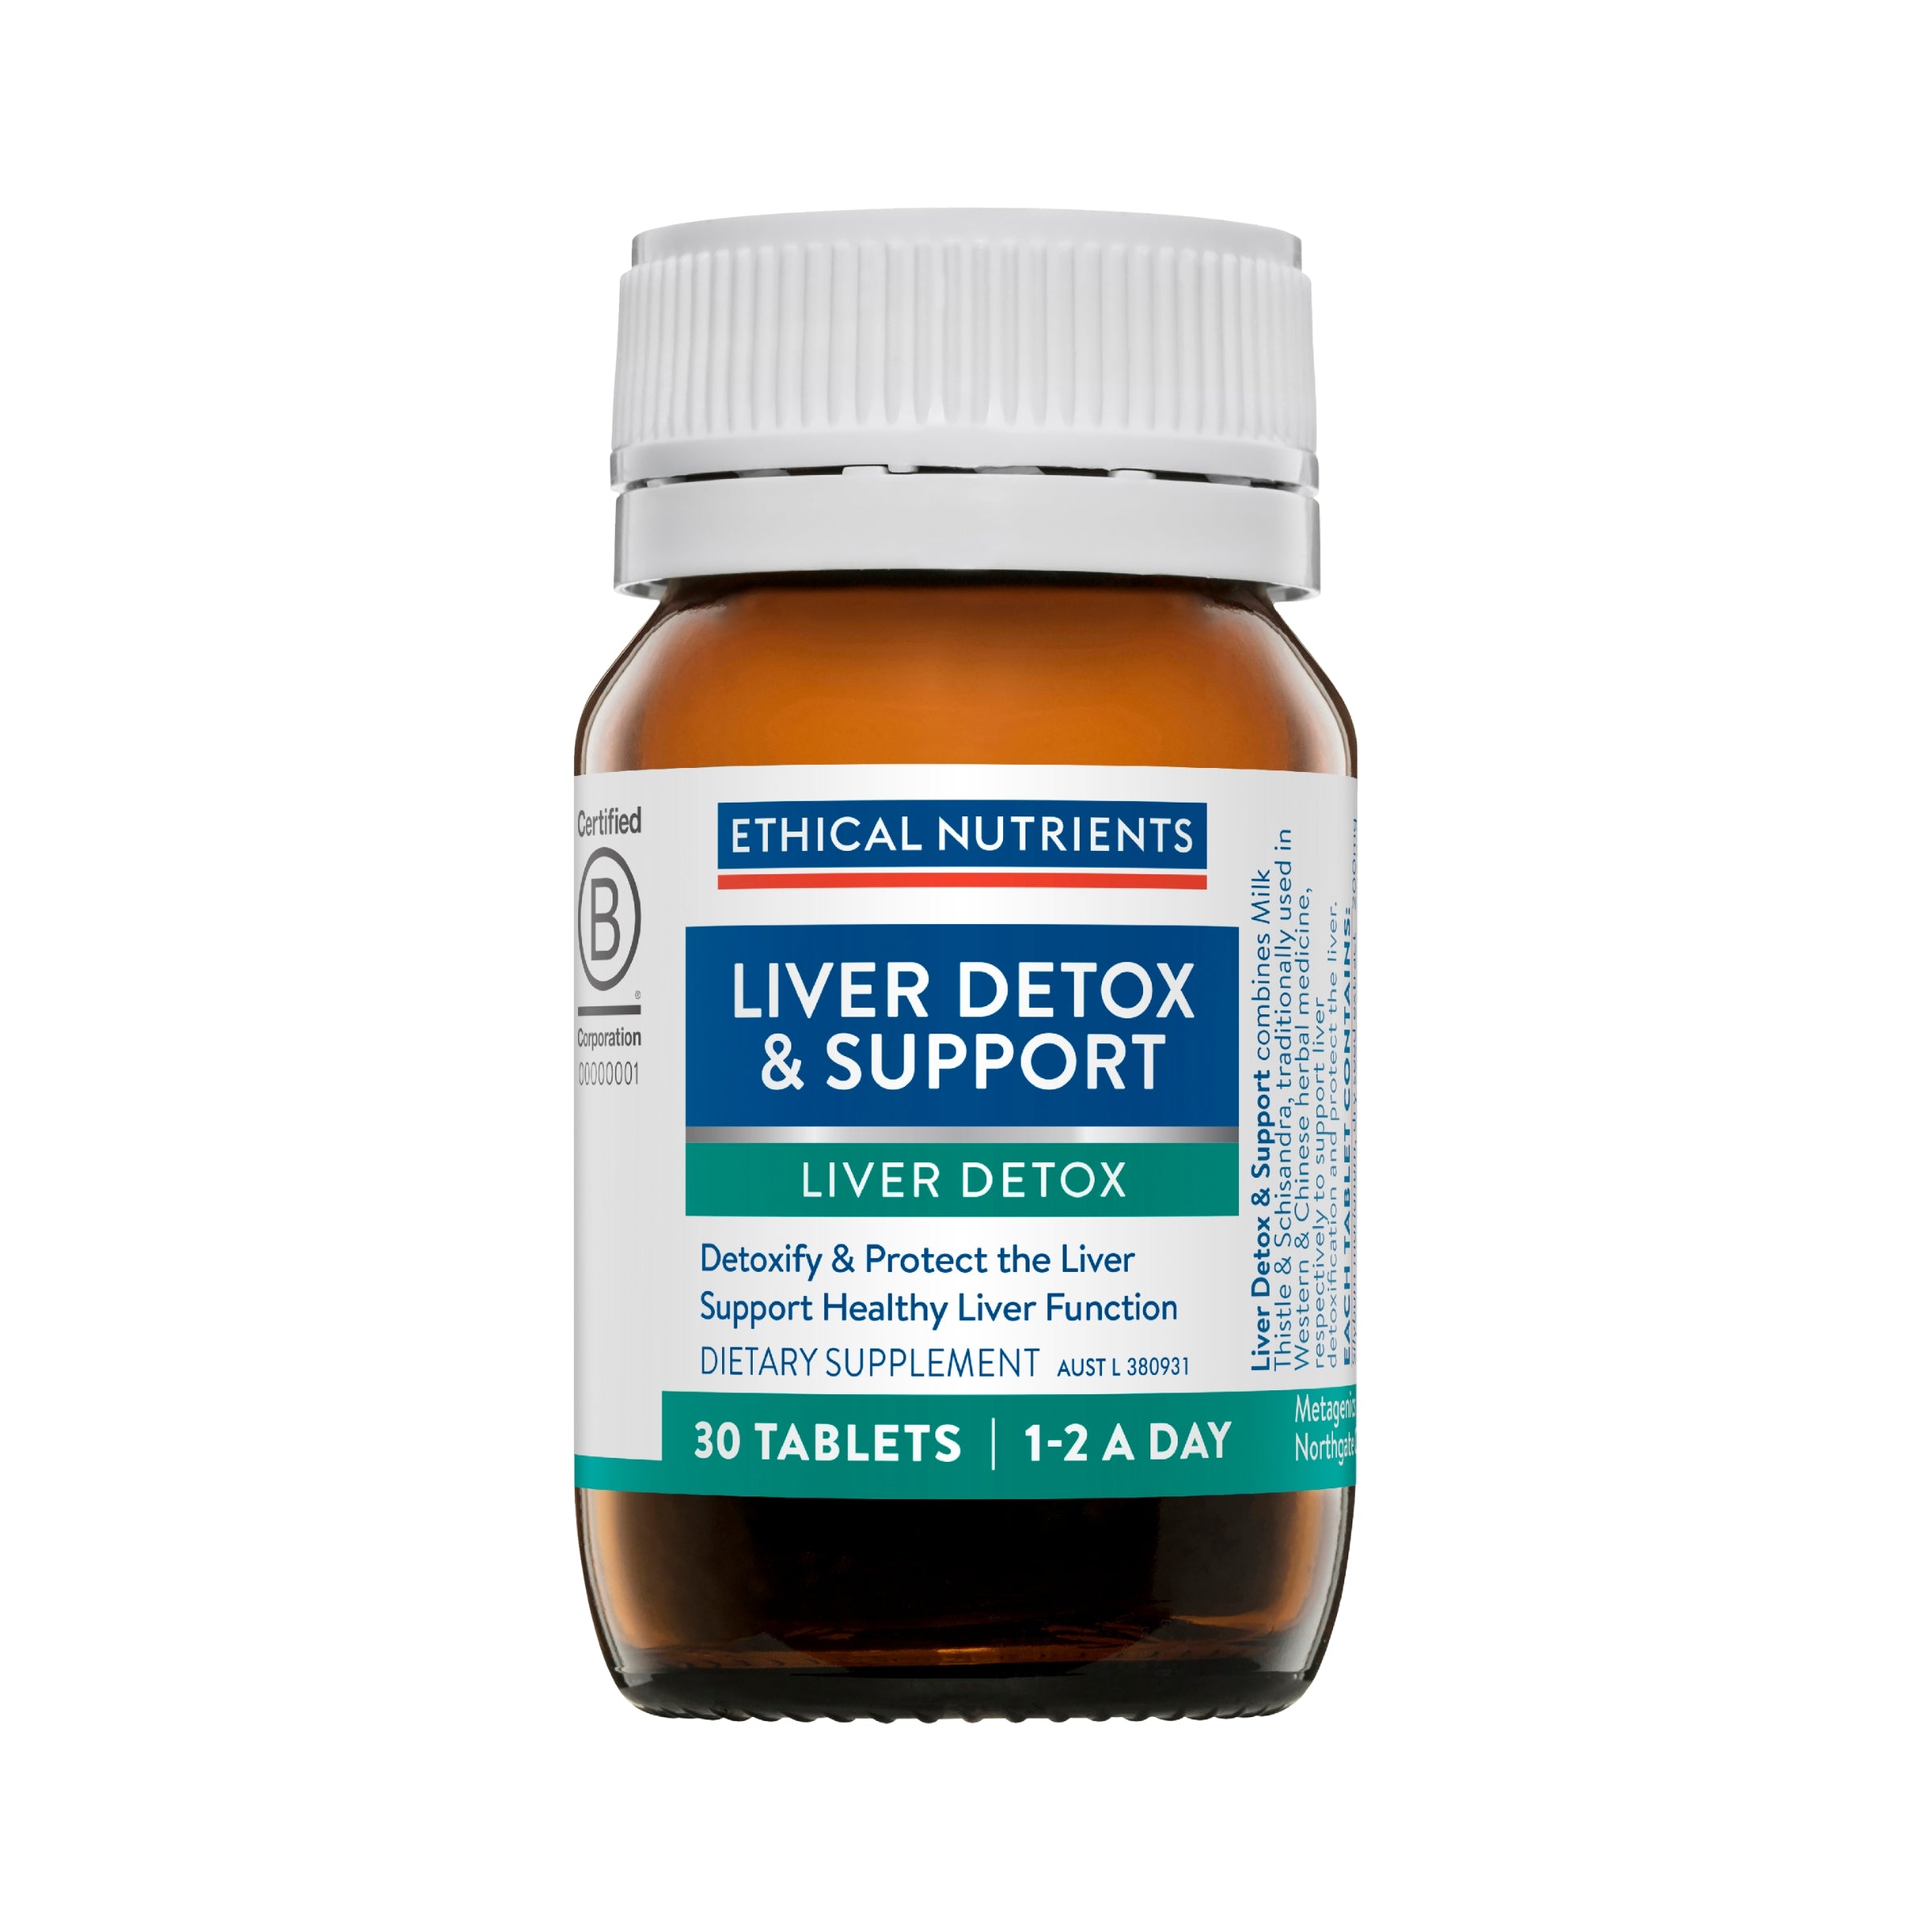 Ethical Nutrients Liver Detox & Support 30 Tablets #size_30 tablets